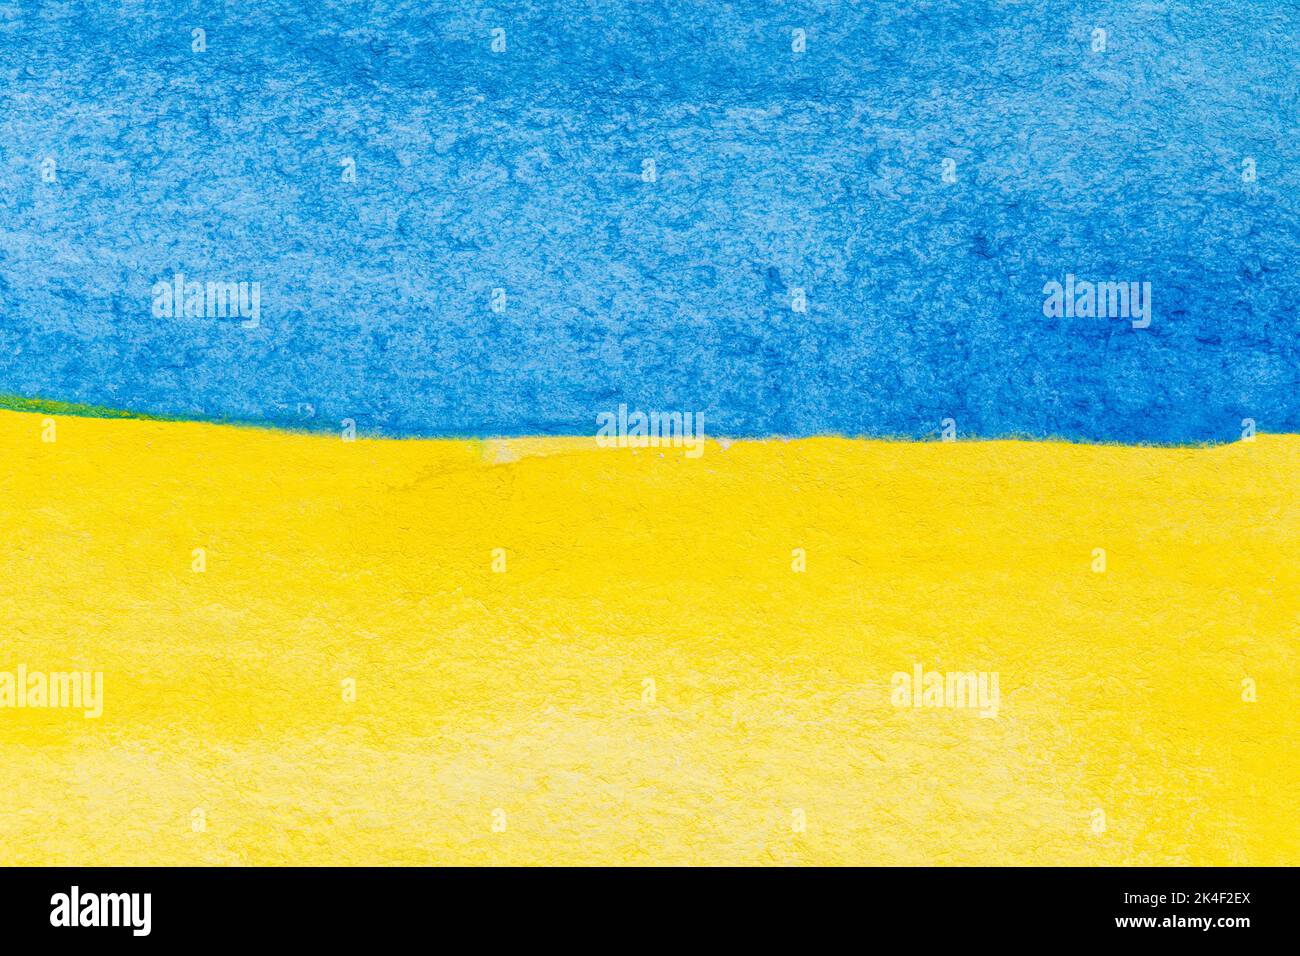 Flag of Ukraine painted with watercolors. Macro close-up of blue and yellow watercolour painting. Textured aquarelle paper background with copy space. Stock Photo